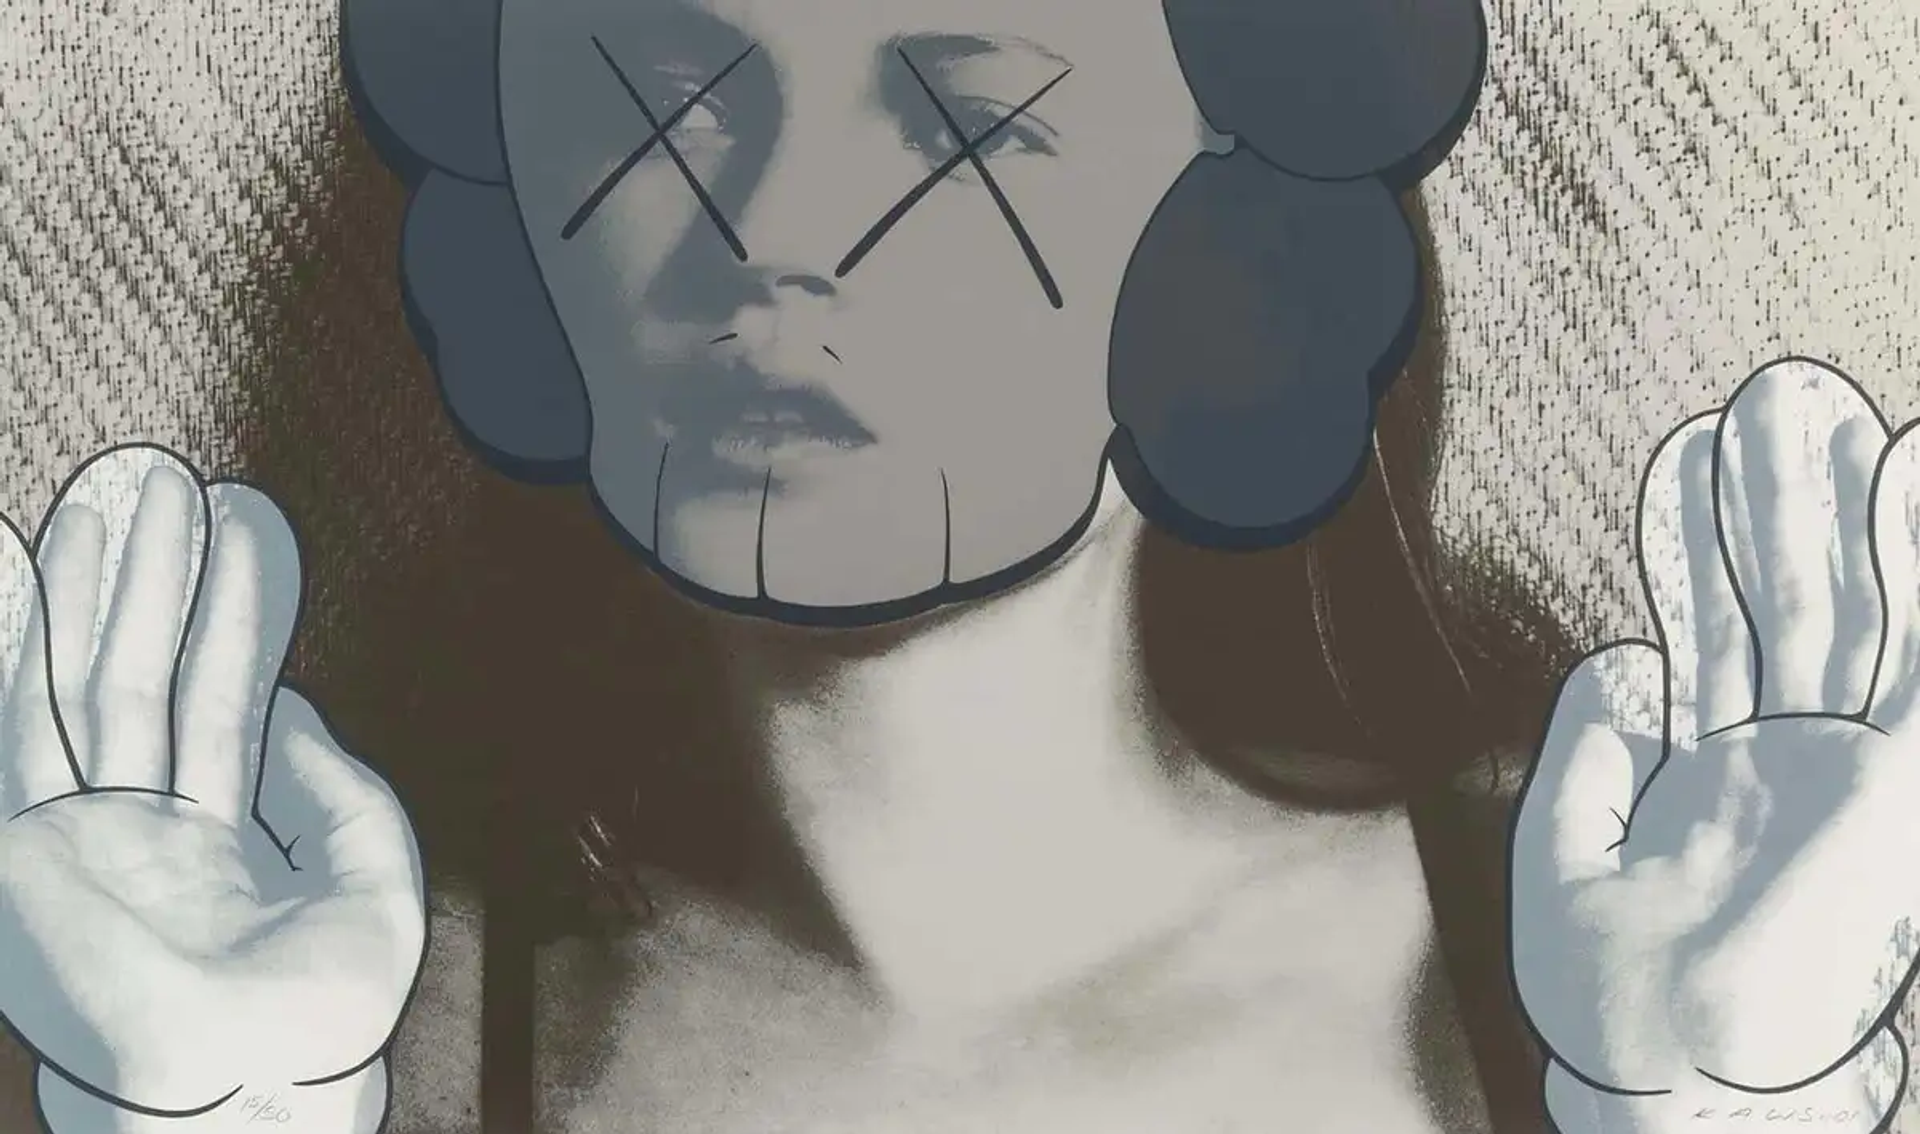 KAWS’ Kate Moss, White Gloves. A screenprint of a black and white photo of Kate Moss with animated style gloves over her hands and an animated style skull over her face.